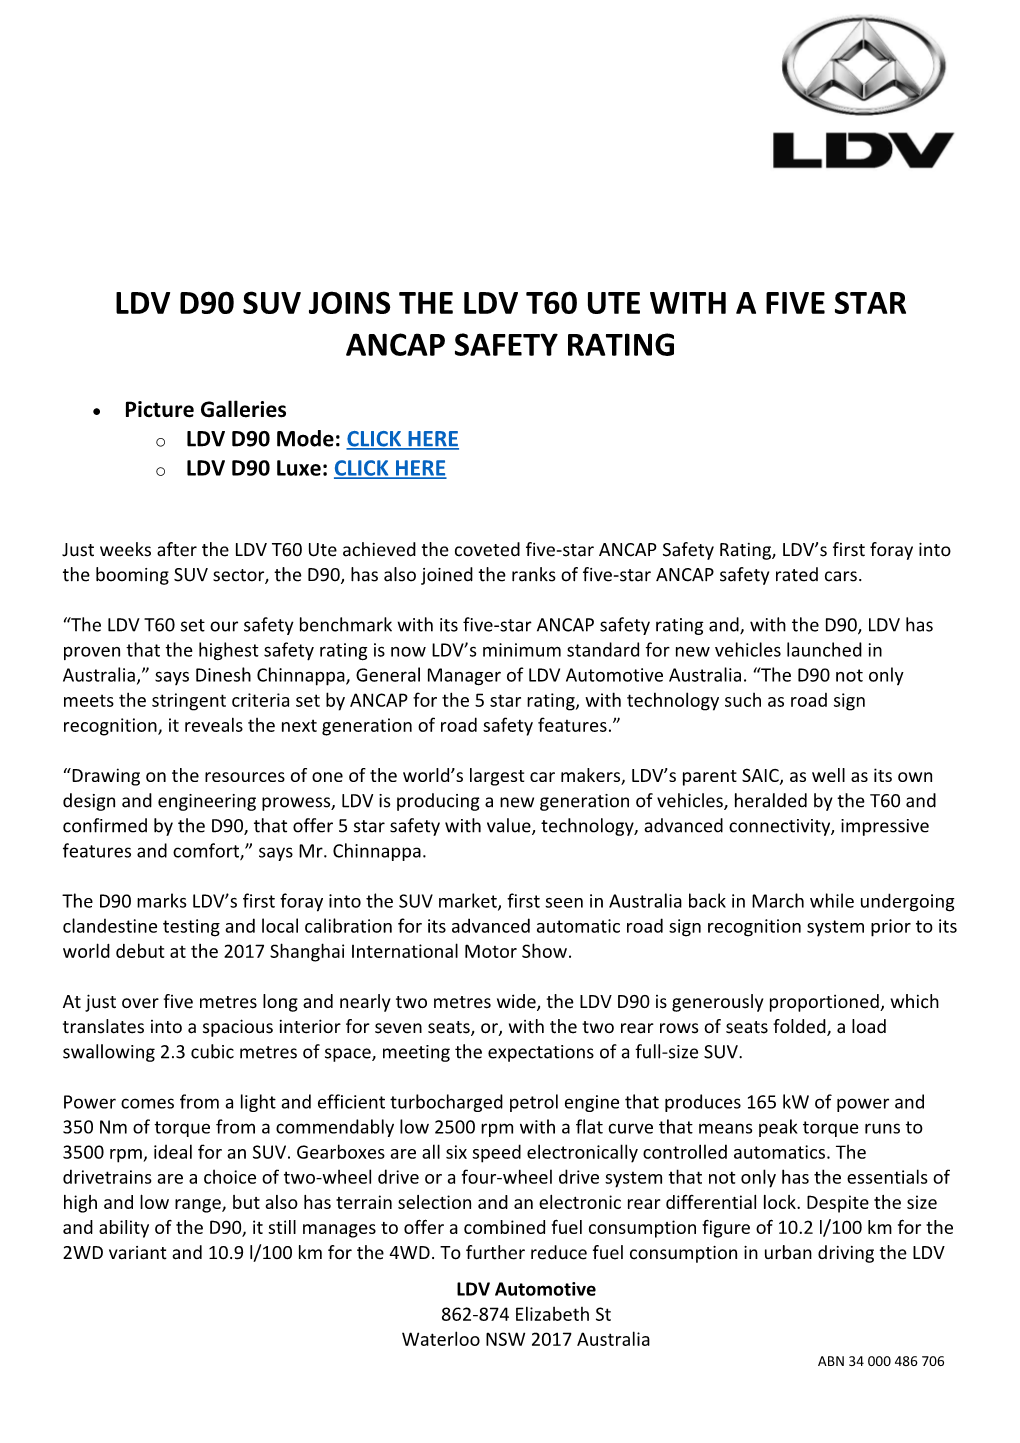 LDV D90 Suv Joins the Ldv T60 UTE with a Five Star Ancap SAFETY Rating